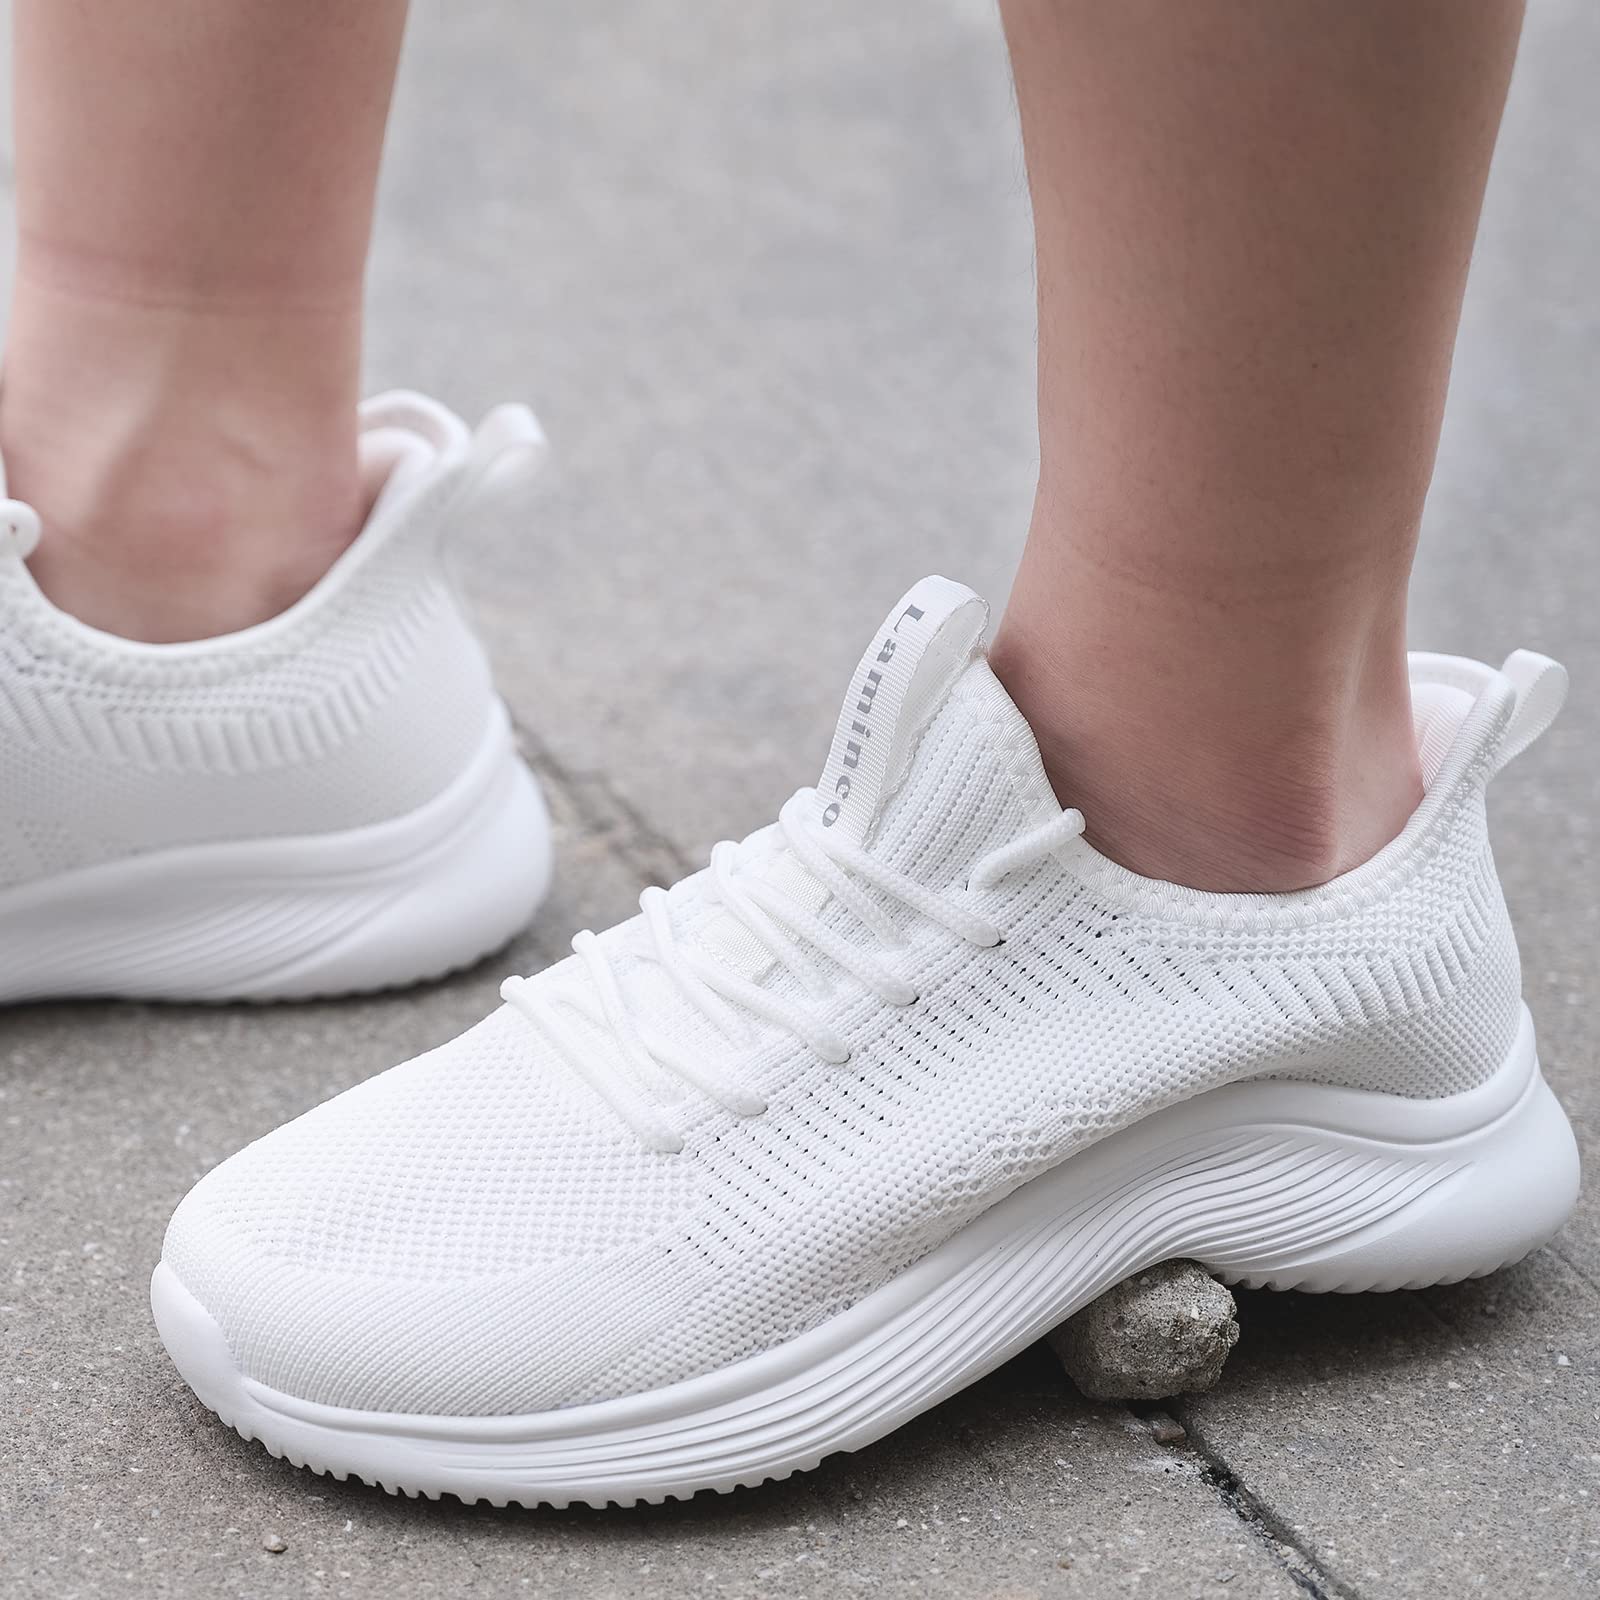 Lamincoa Womens Walking Tennis Shoes Slip On Lightweight Athletic Comfort Casual Memory Foam Sneakers for Work Gym Running Nursing White US 8.5